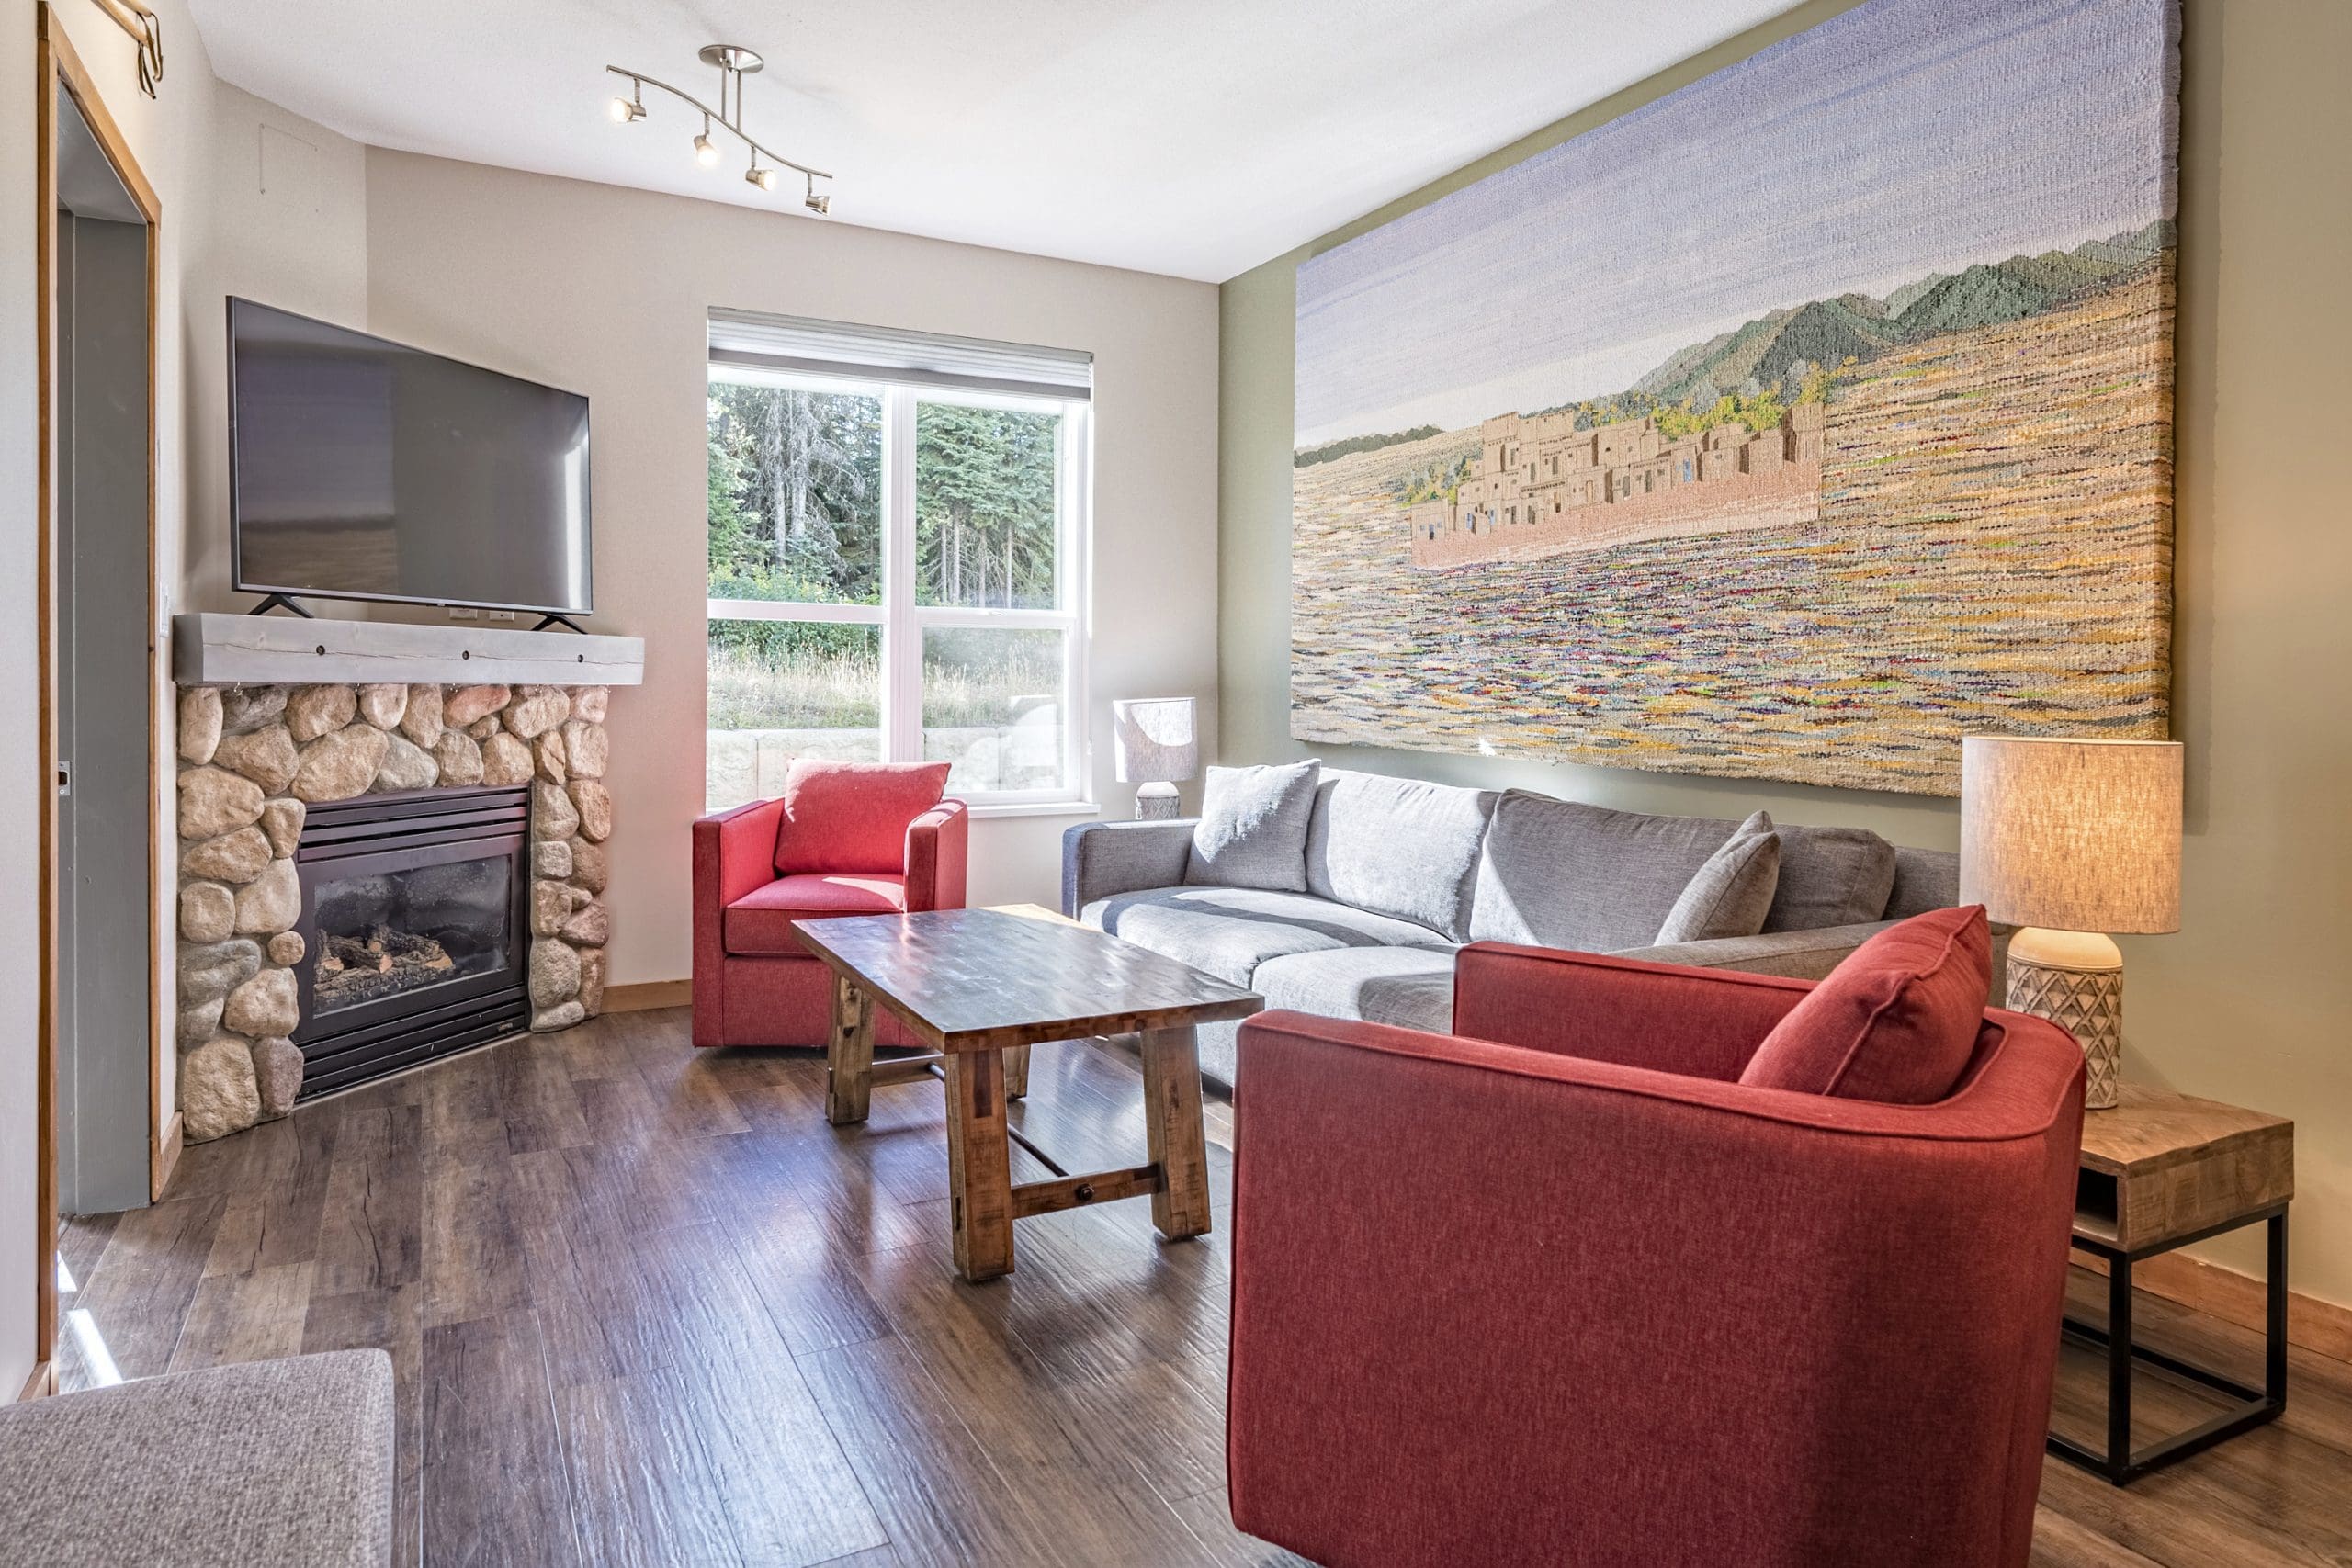 Newly renovated ground floor condo living room with gas fireplace, TV and beautiful artwork. New appliances, furnishing and hardwood floors, free parking and step right outside your door to the Silver Queen chairlift runs.